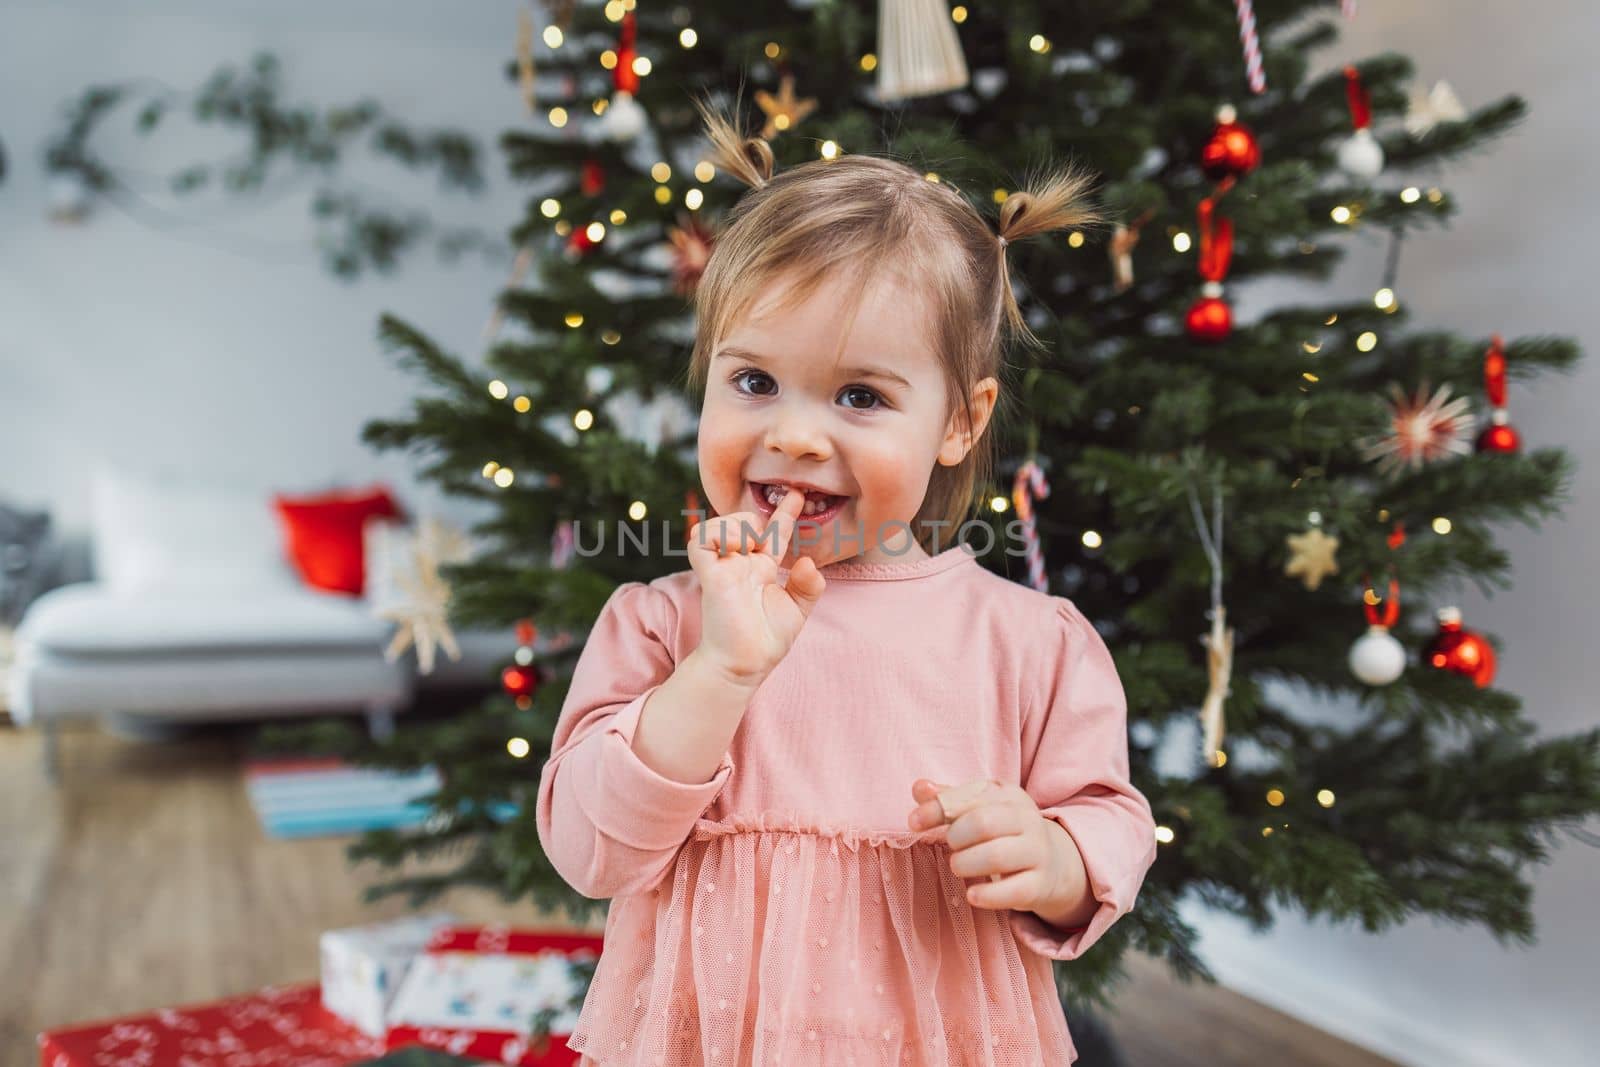 Young smiling caucasian baby girl portrait in front of the Christmas tree by VisualProductions